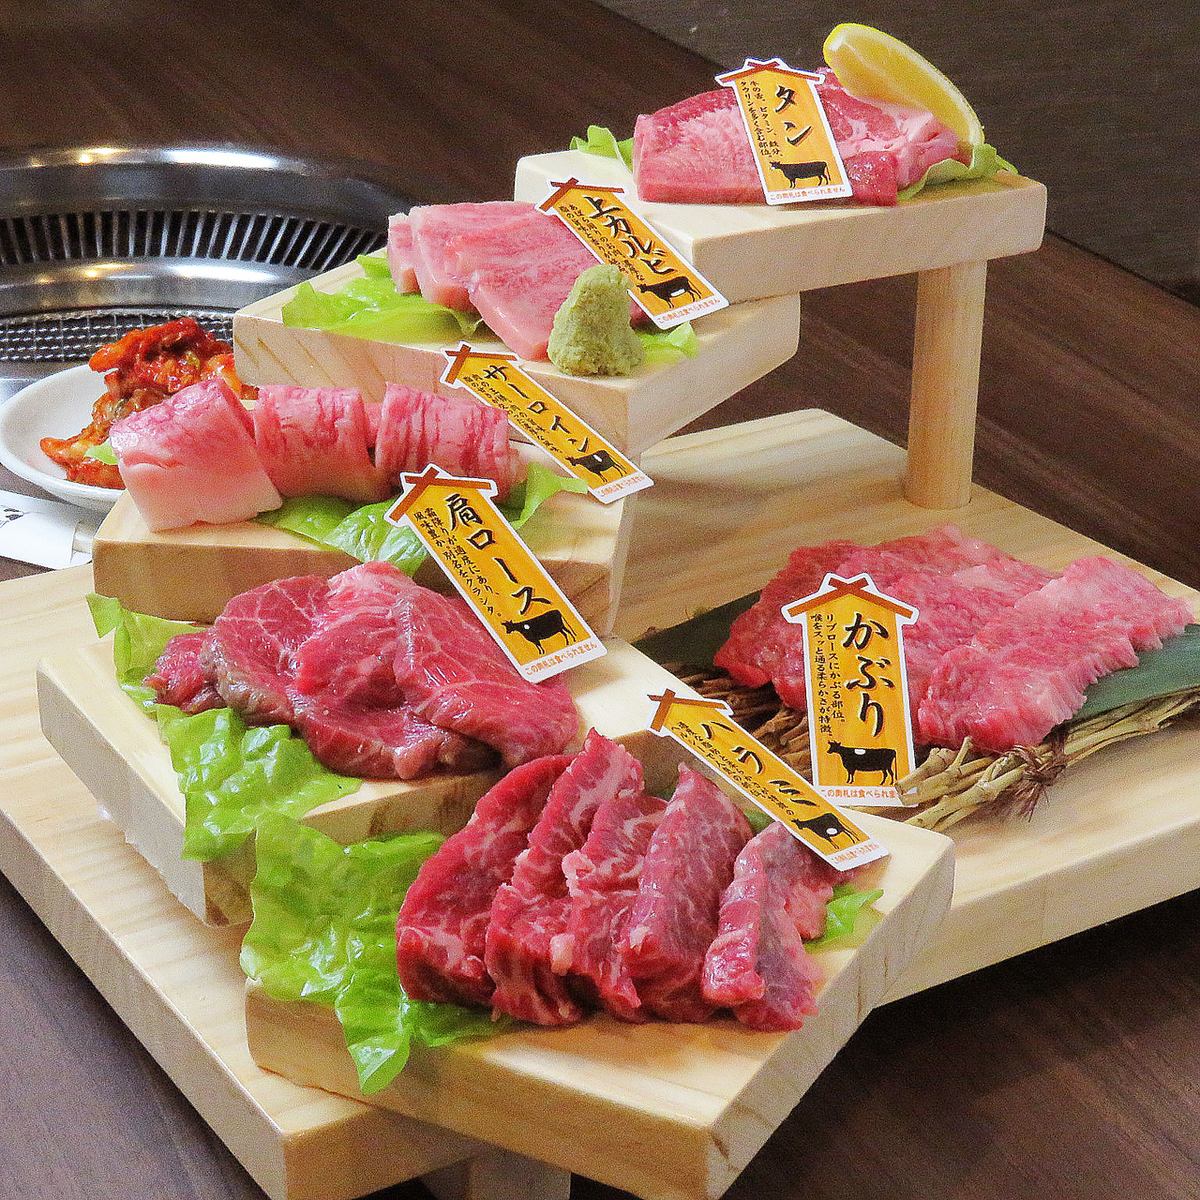 Opened in October 2020! You can enjoy Japanese beef and hormones at a reasonable price.